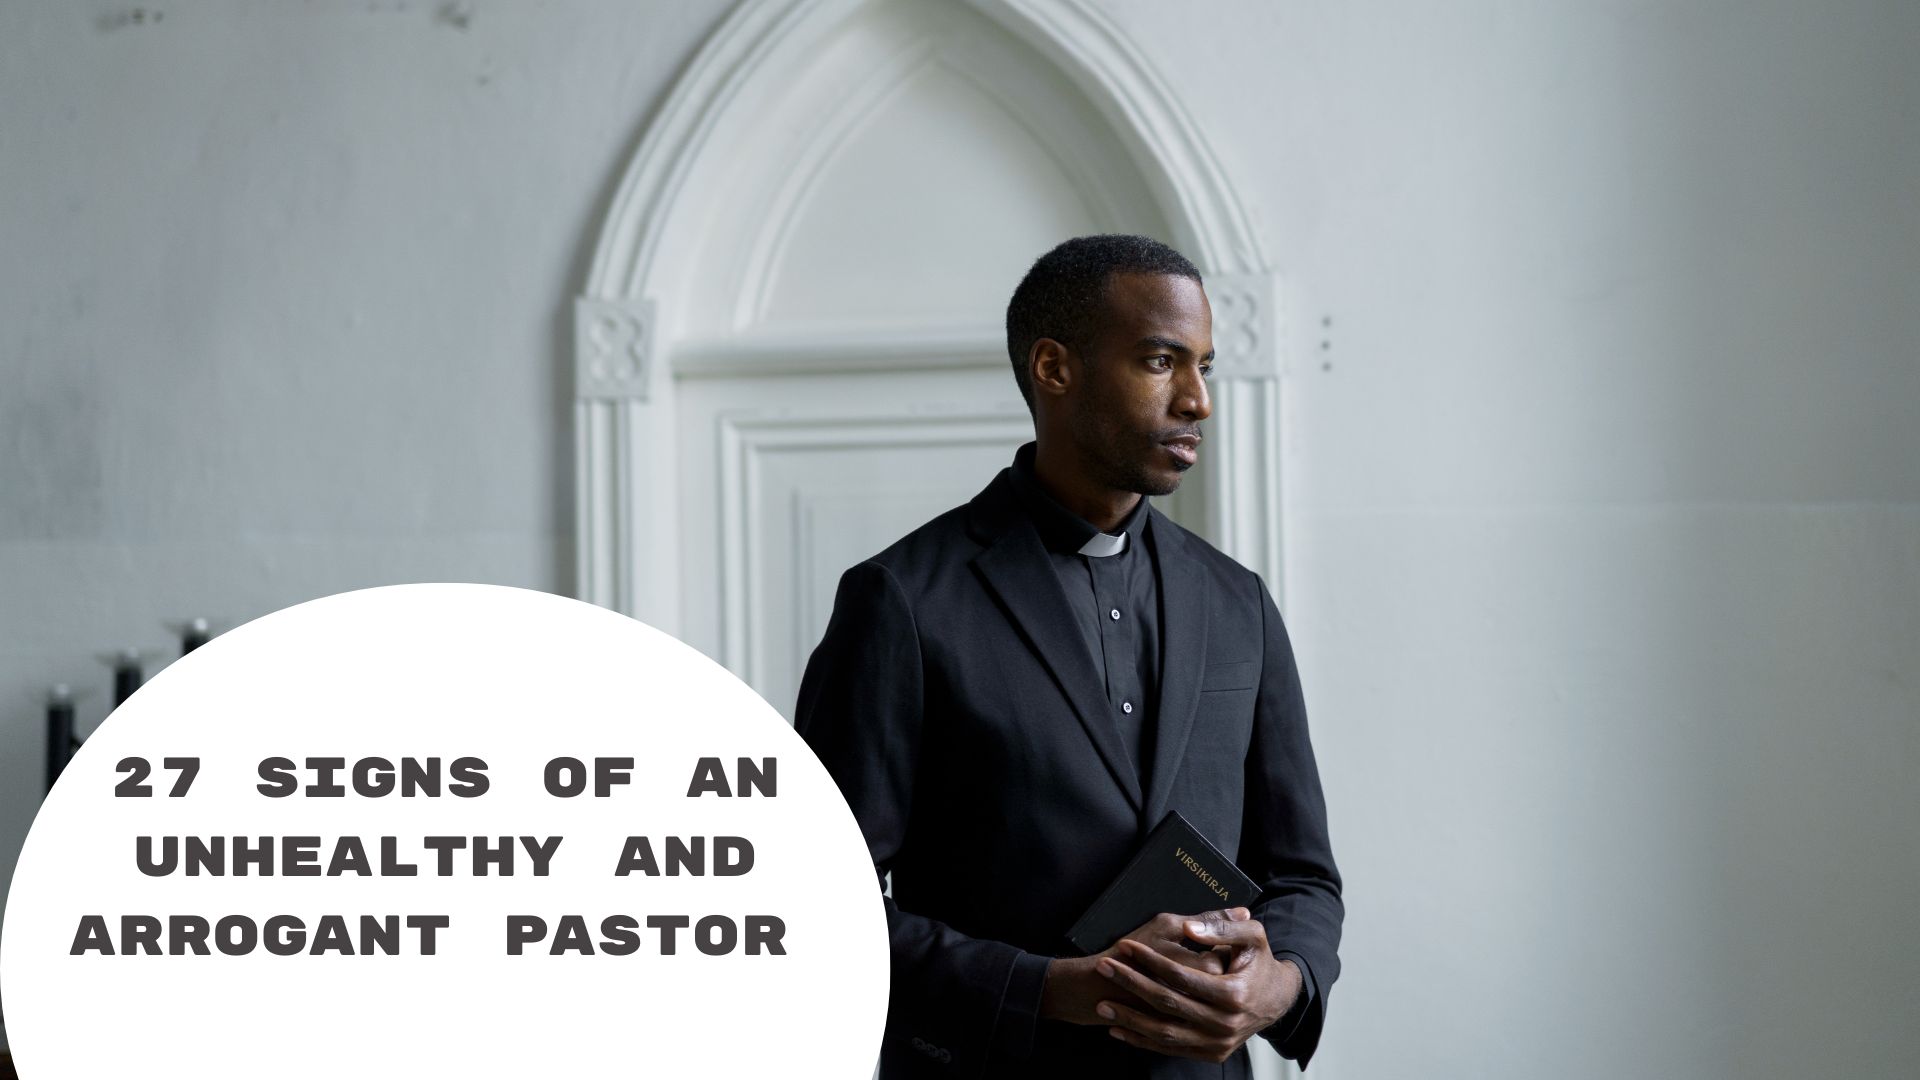 27 Signs Of An Unhealthy And Arrogant Pastor